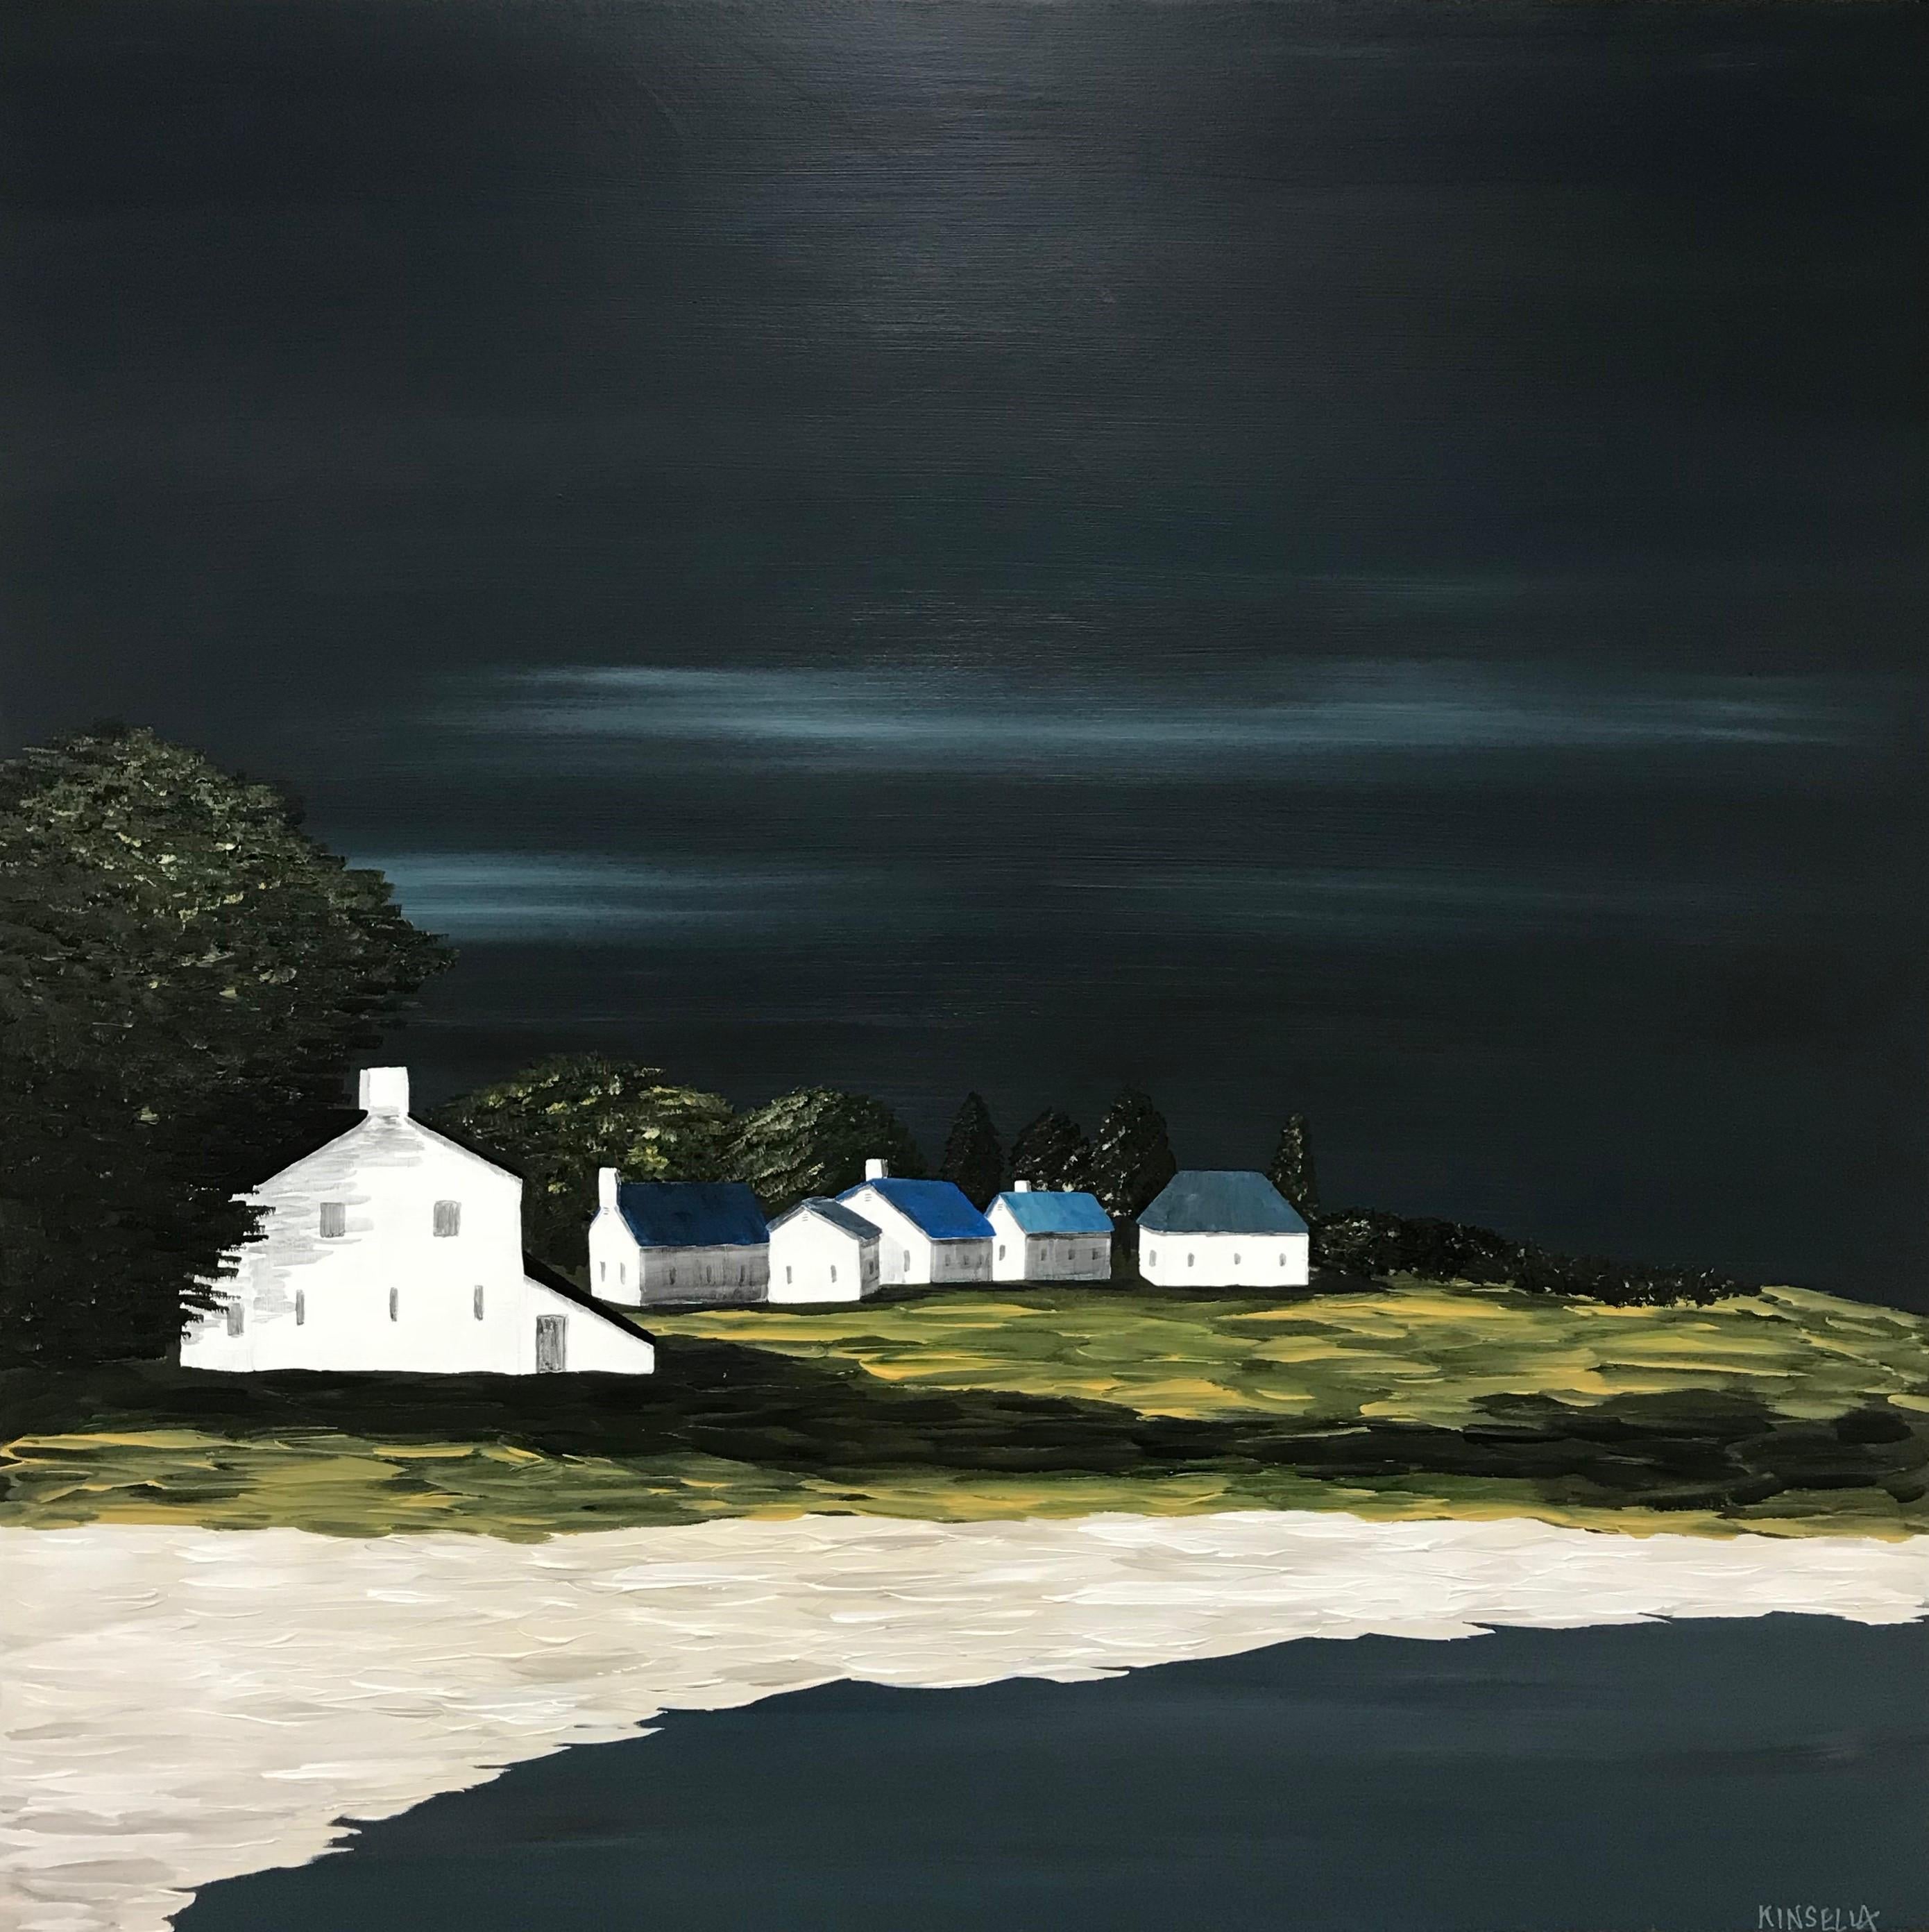 'Village on the Green' is a contemporary, medium size acrylic on canvas coastal painting created by American artist Susan Kinsella in 2018. Featuring a beautifully contrasting palette made of black, dark grey, green and beige colors accented with a